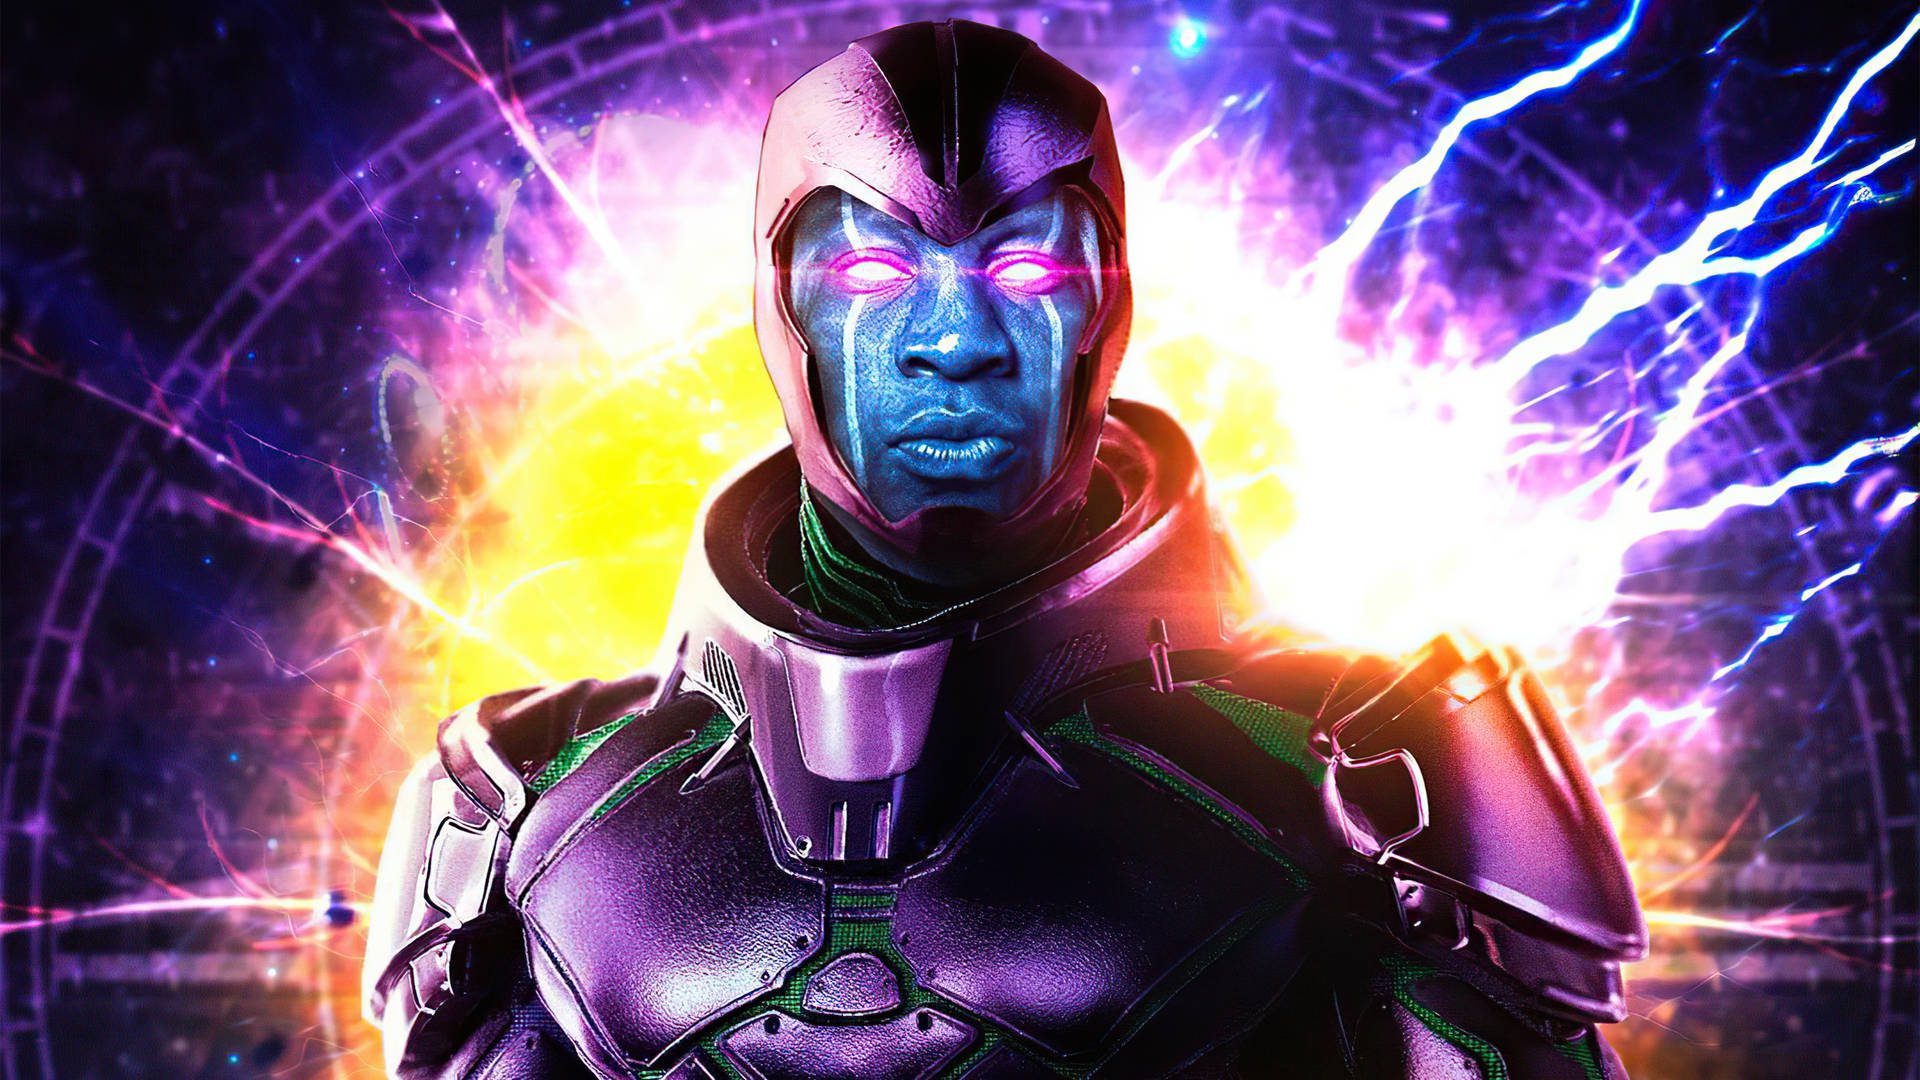 Mcu's Kang The Conqueror Background